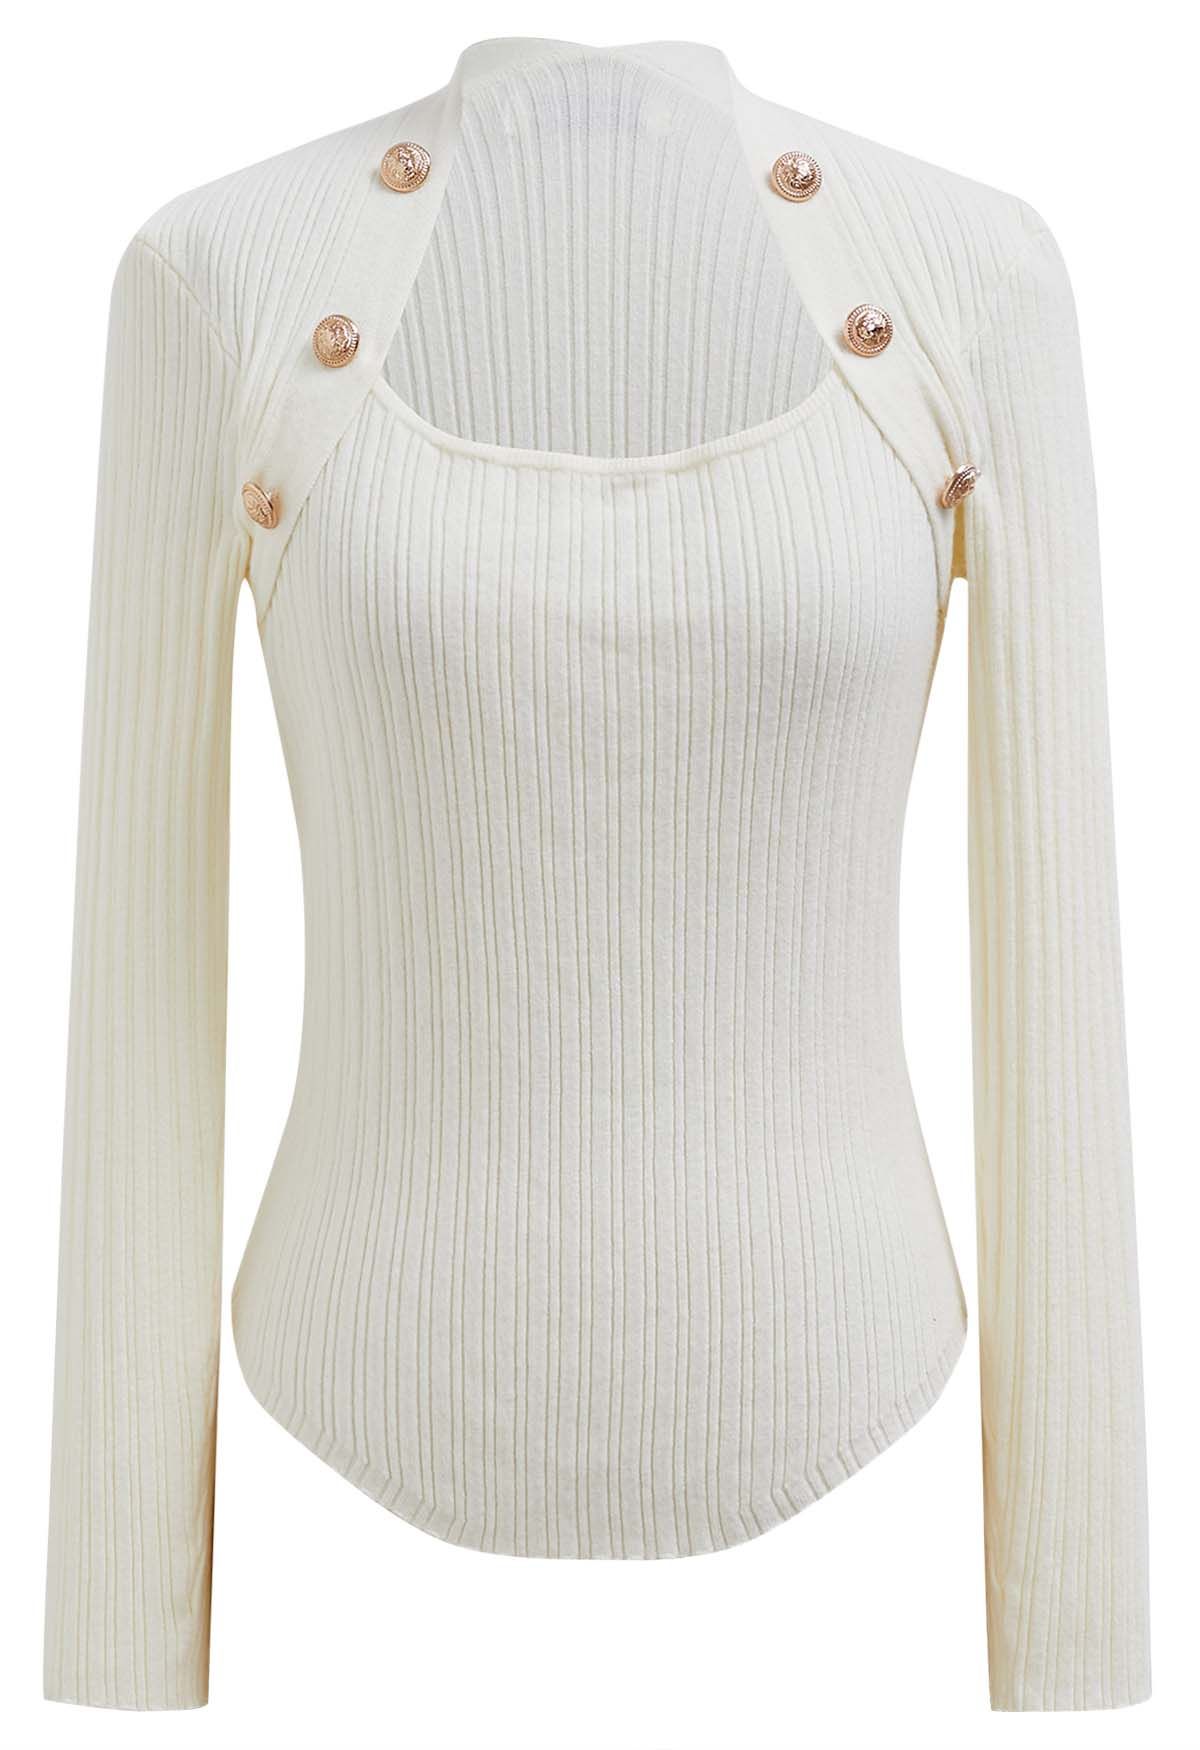 Button Embellished Square Neck Knit Top in Cream